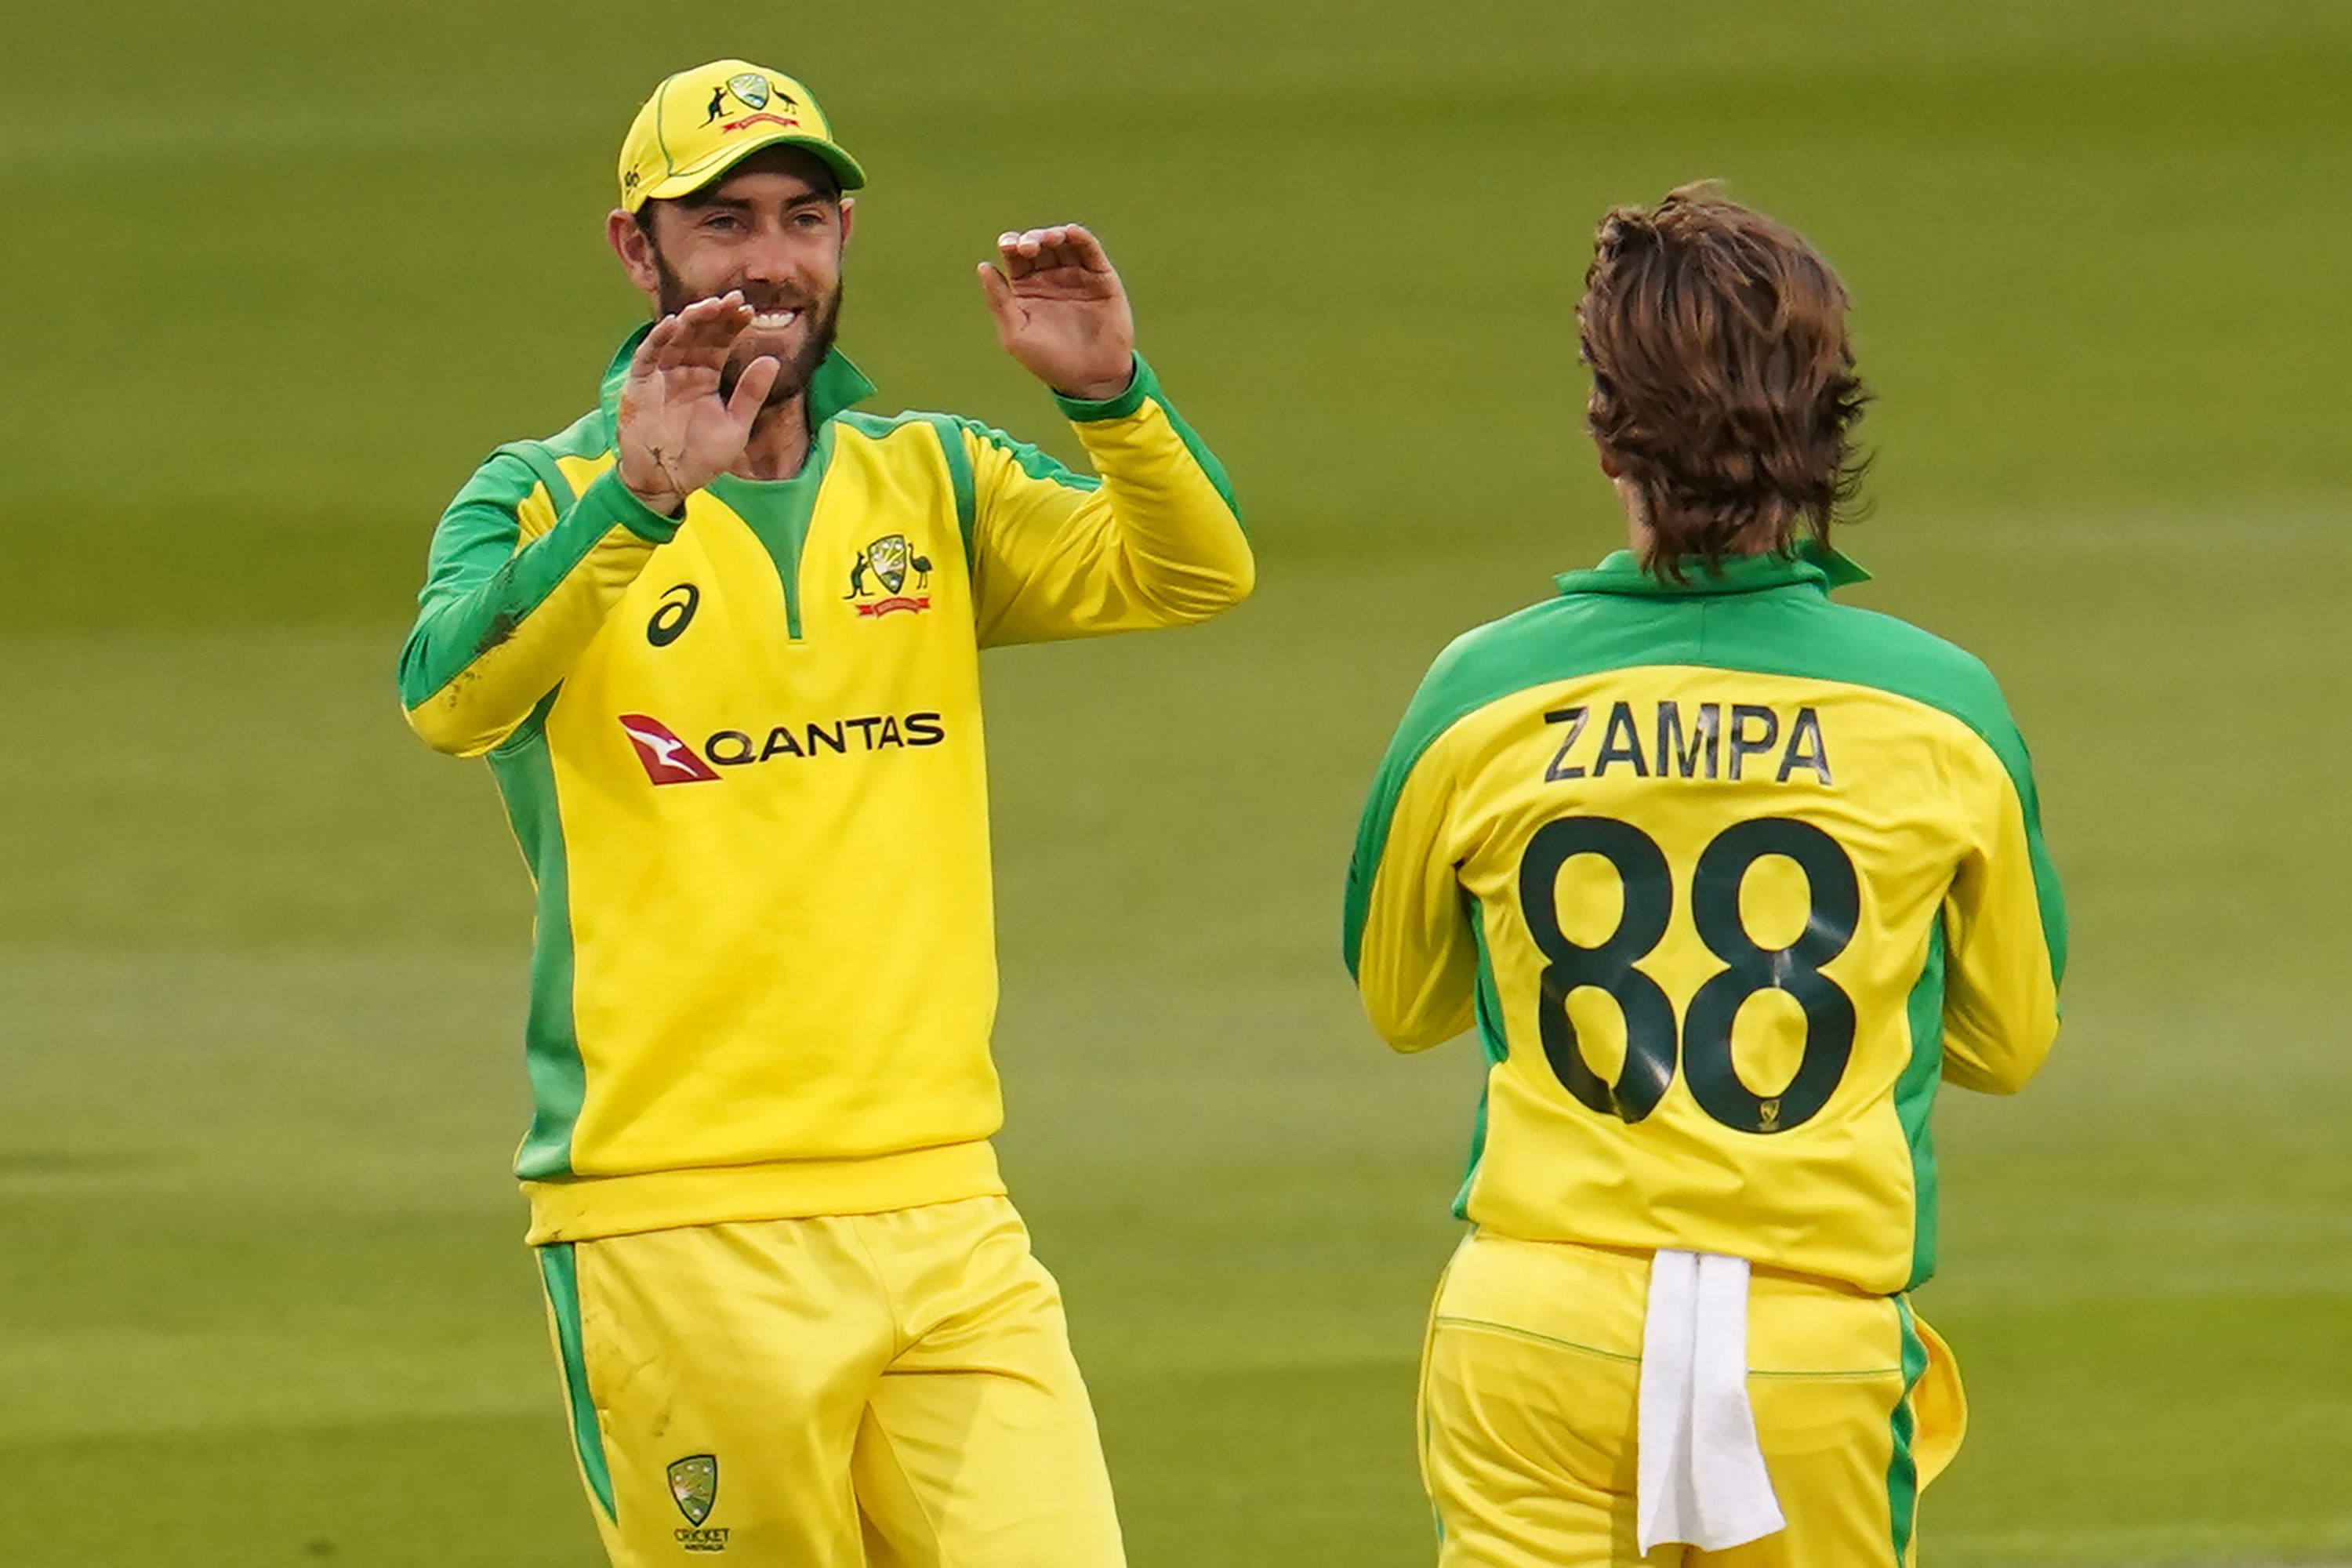 Australia's Glenn Maxwell (L) celebrates with Australia's Adam Zampa after taking a catch to dismiss England's Eoin Morgan during the one-day international (ODI) cricket match between England and Australia at Old Trafford in Manchester on September 11, 2020. Credit: AFP Photo